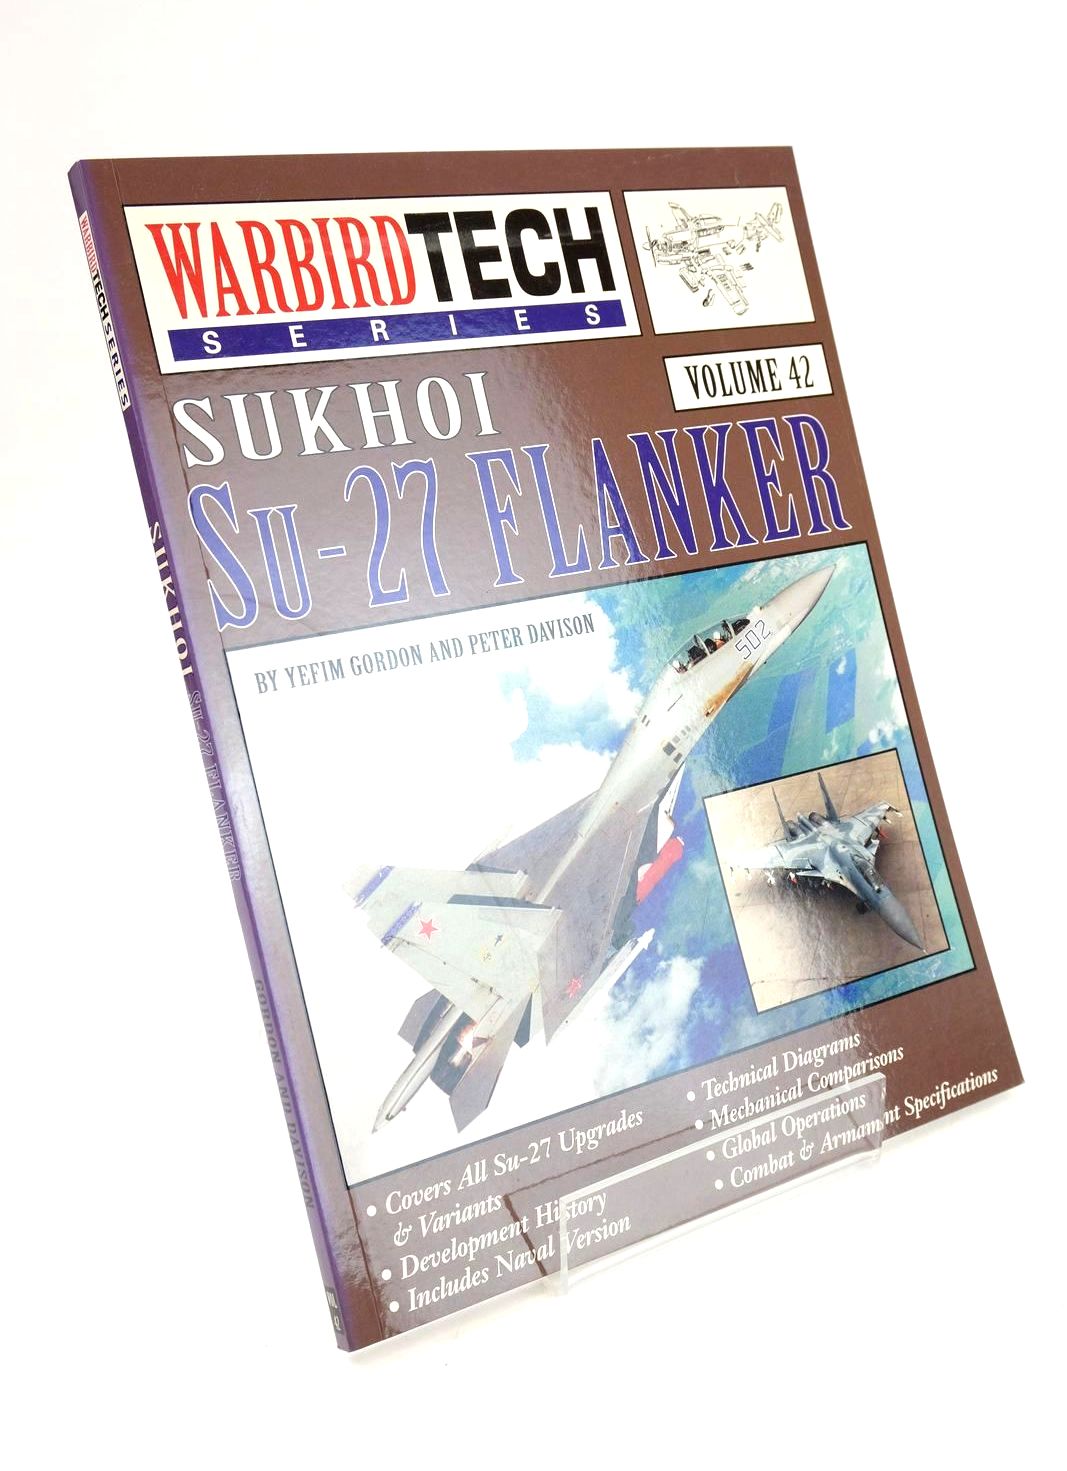 Photo of SUKHOI SU-27 FLANKER written by Gordon, Yefim Davison, Peter published by Speciality Press (STOCK CODE: 1325163)  for sale by Stella & Rose's Books